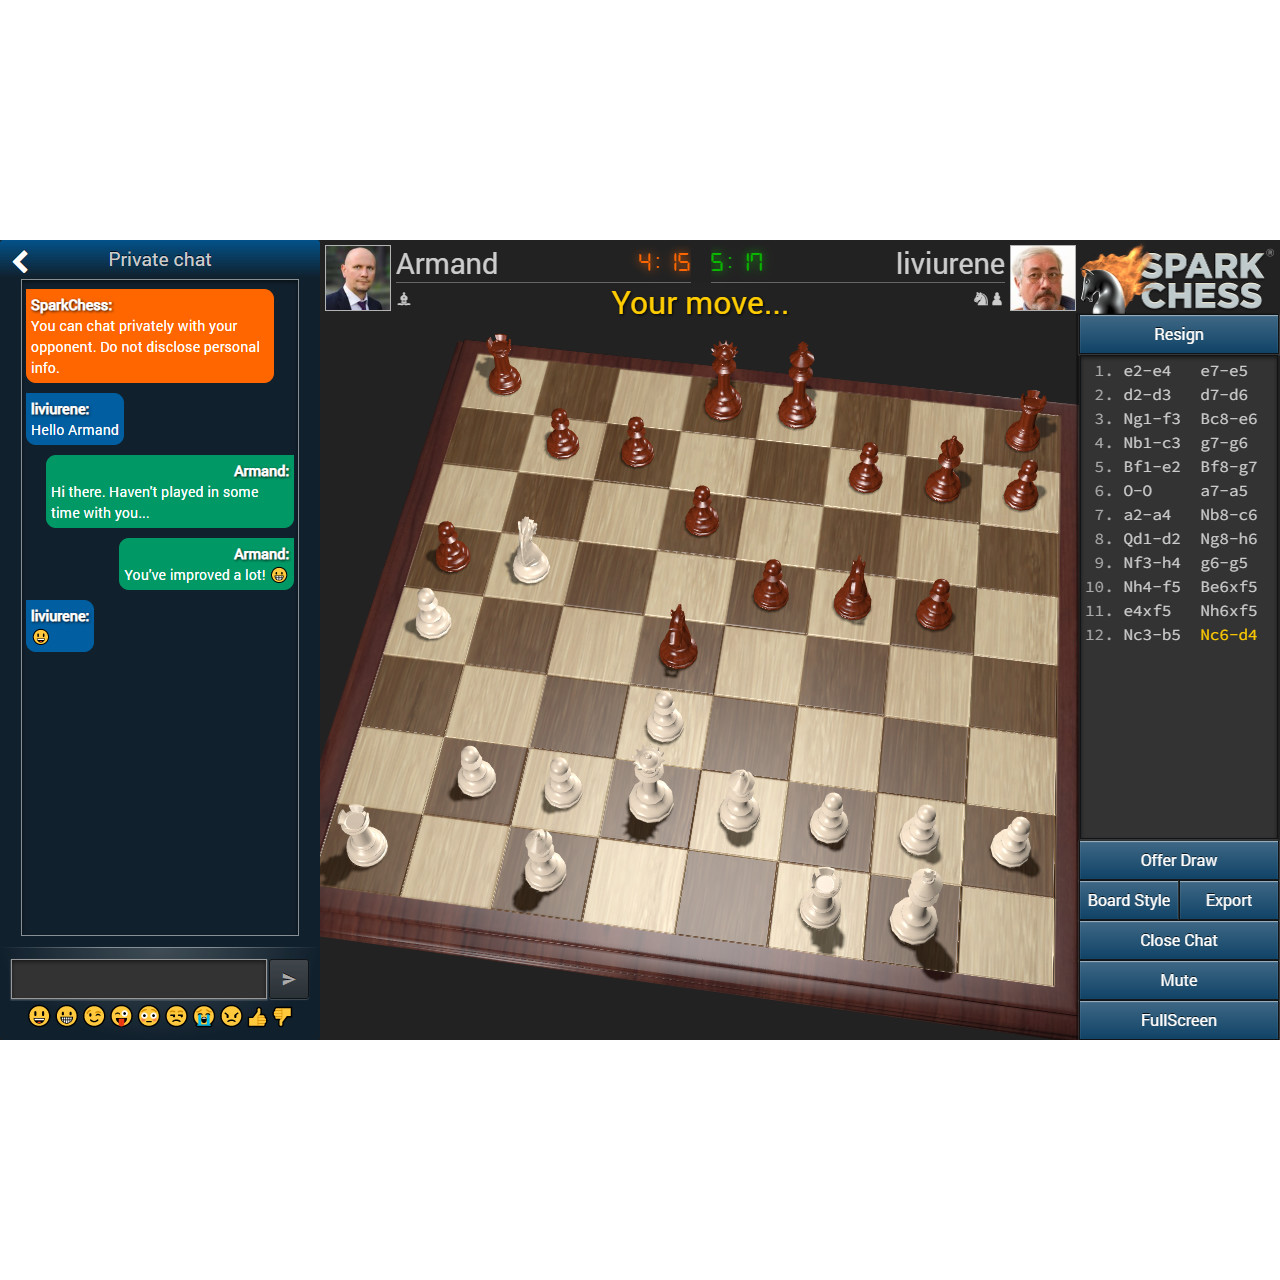 SparkChess Pro (by Media Division SRL) - chess game for Android and iOS -  gameplay. 